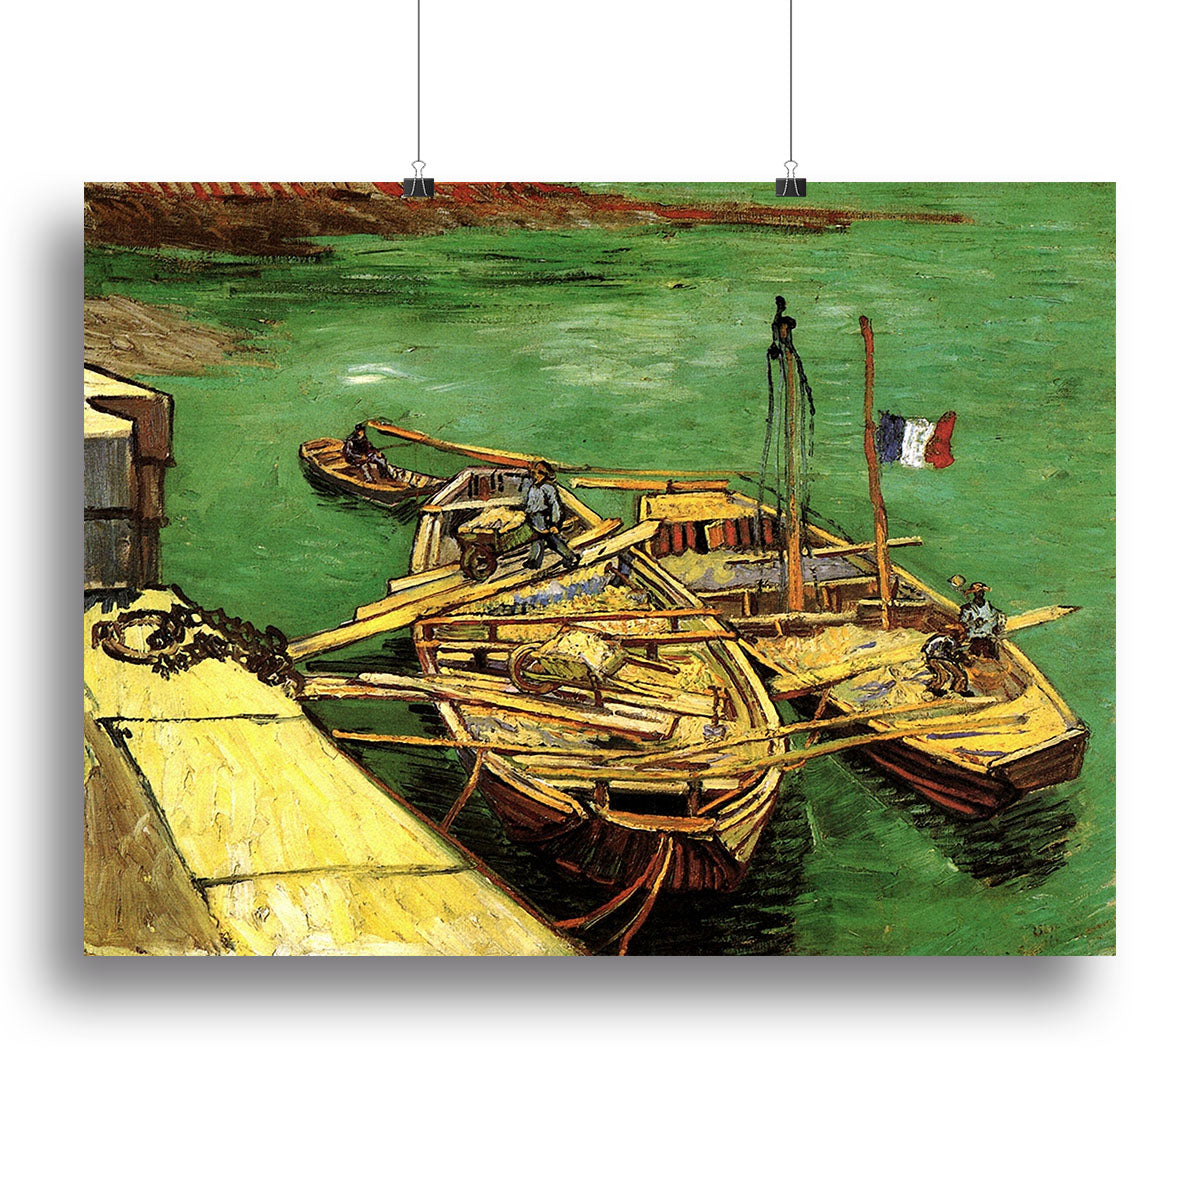 Quay with Men Unloading Sand Barges by Van Gogh Canvas Print or Poster - Canvas Art Rocks - 2